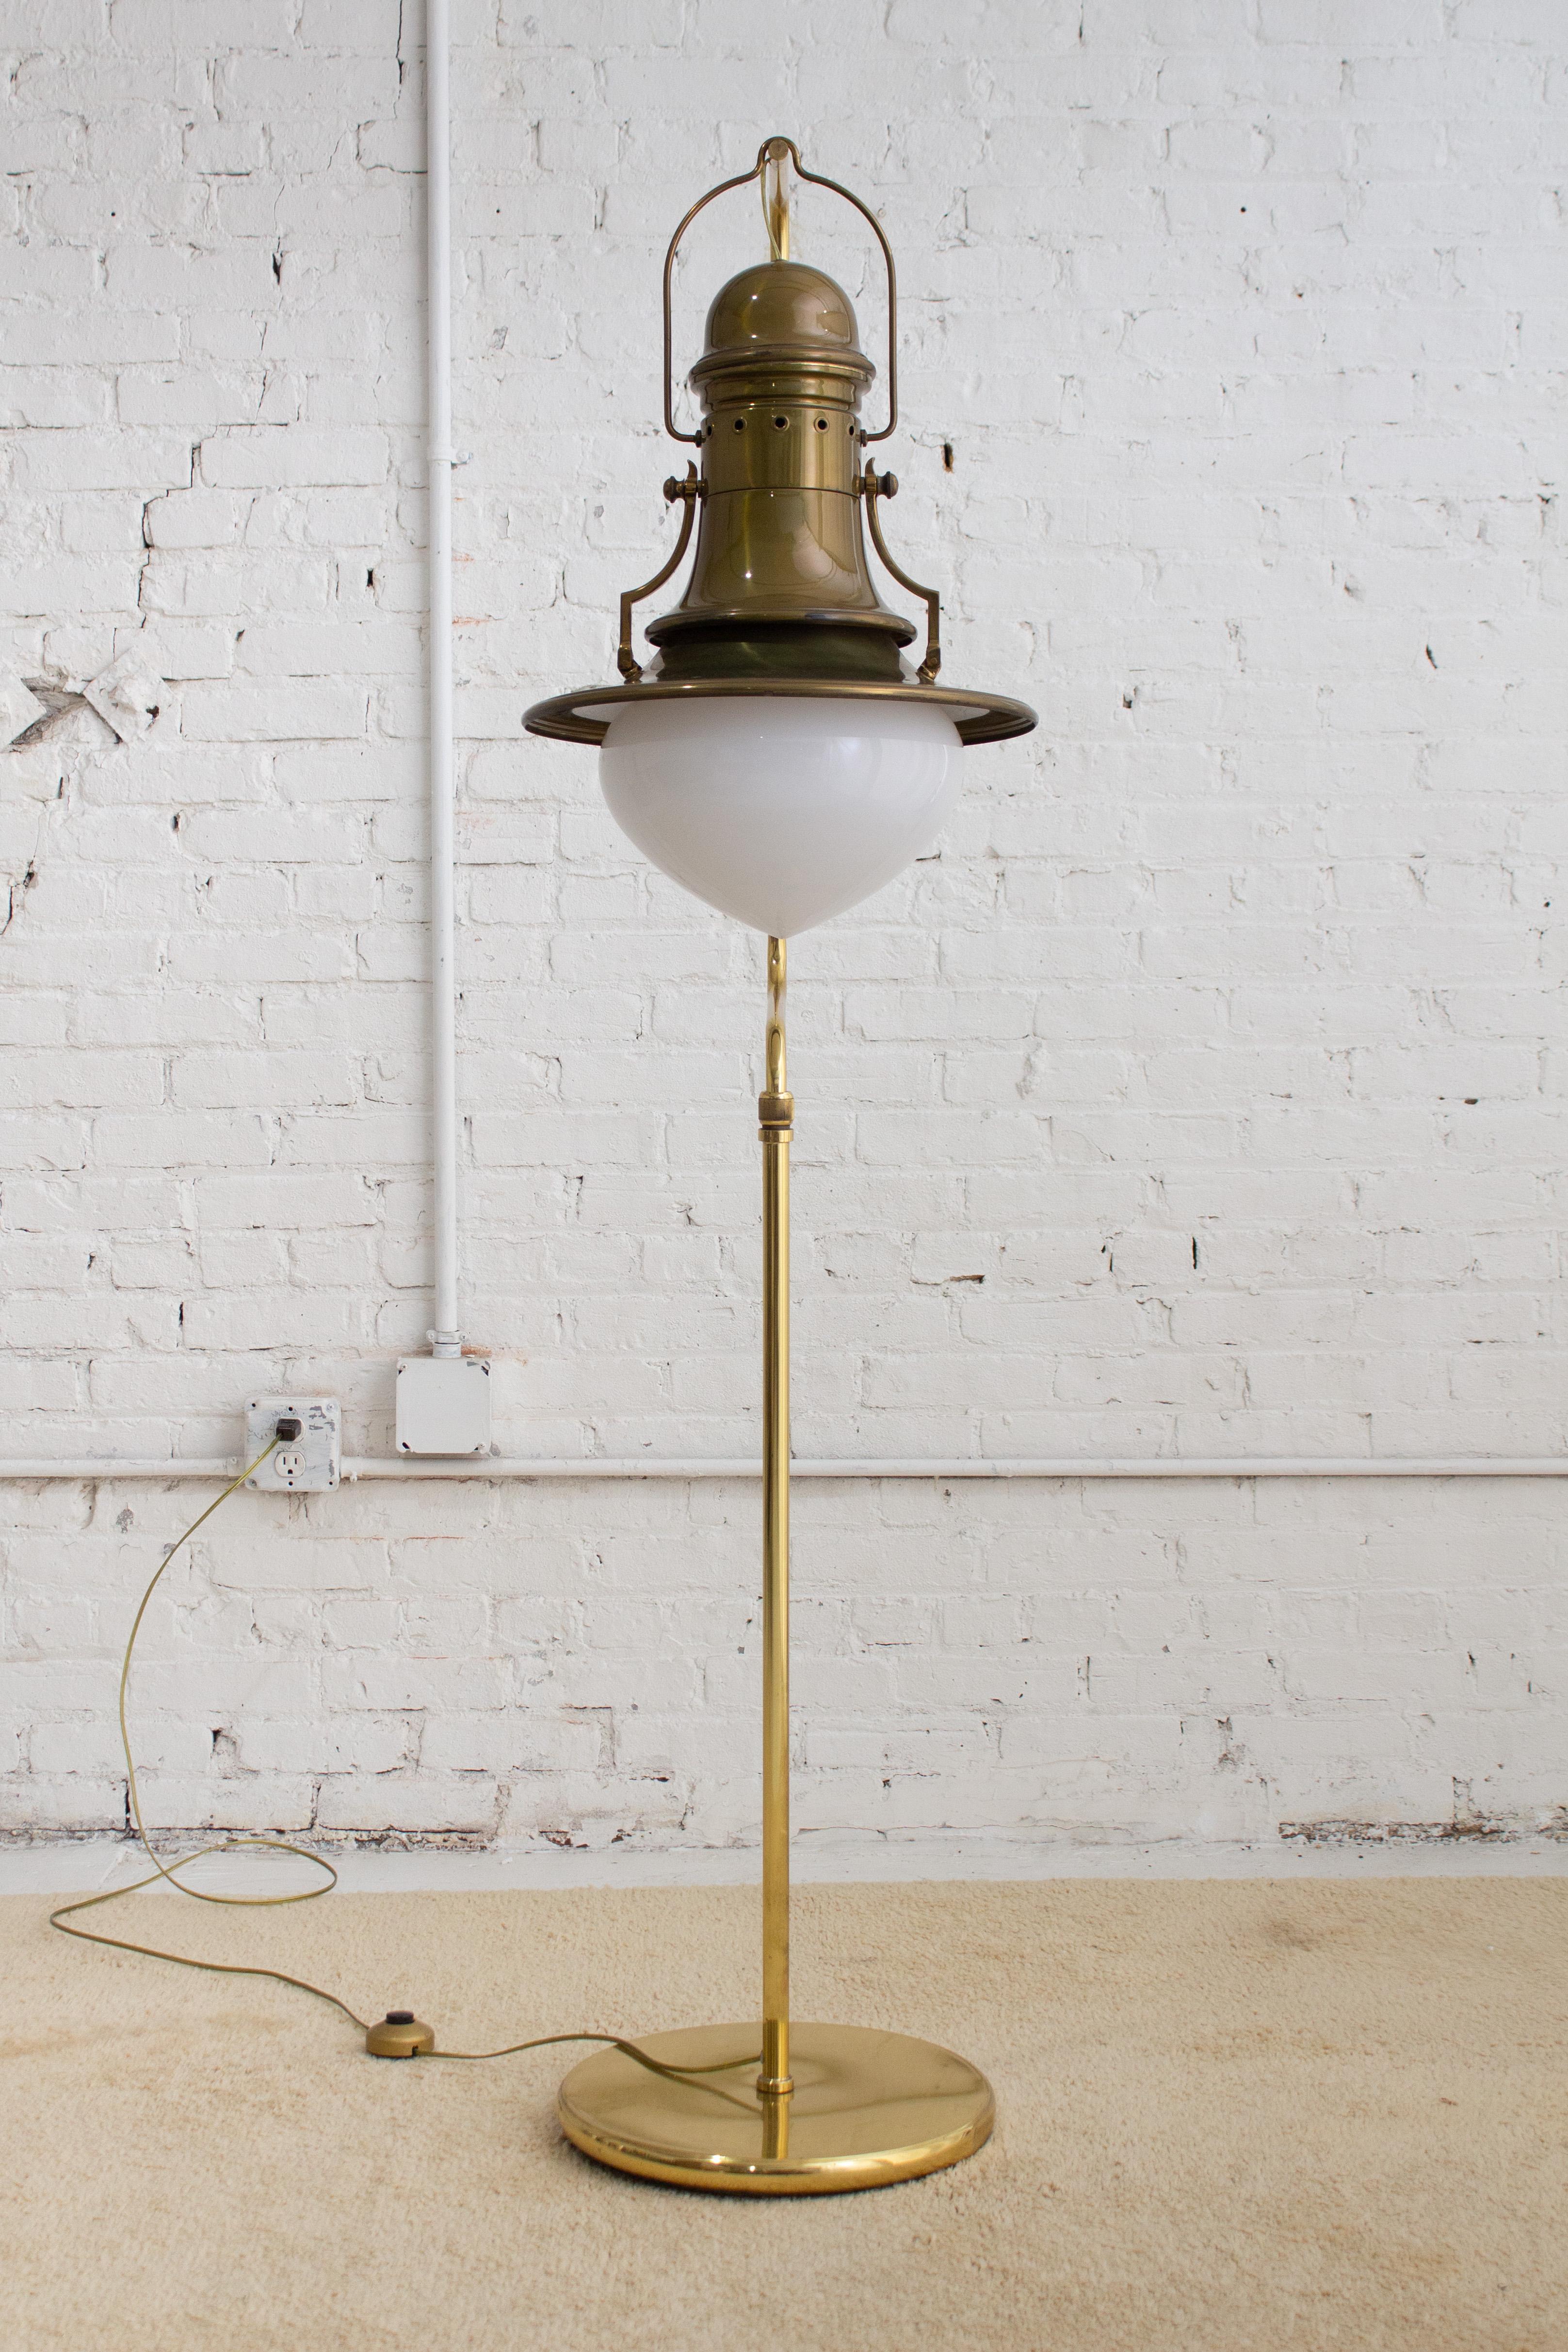 Italian Lantern Style Brass Floor Lamp In Good Condition For Sale In Brooklyn, NY